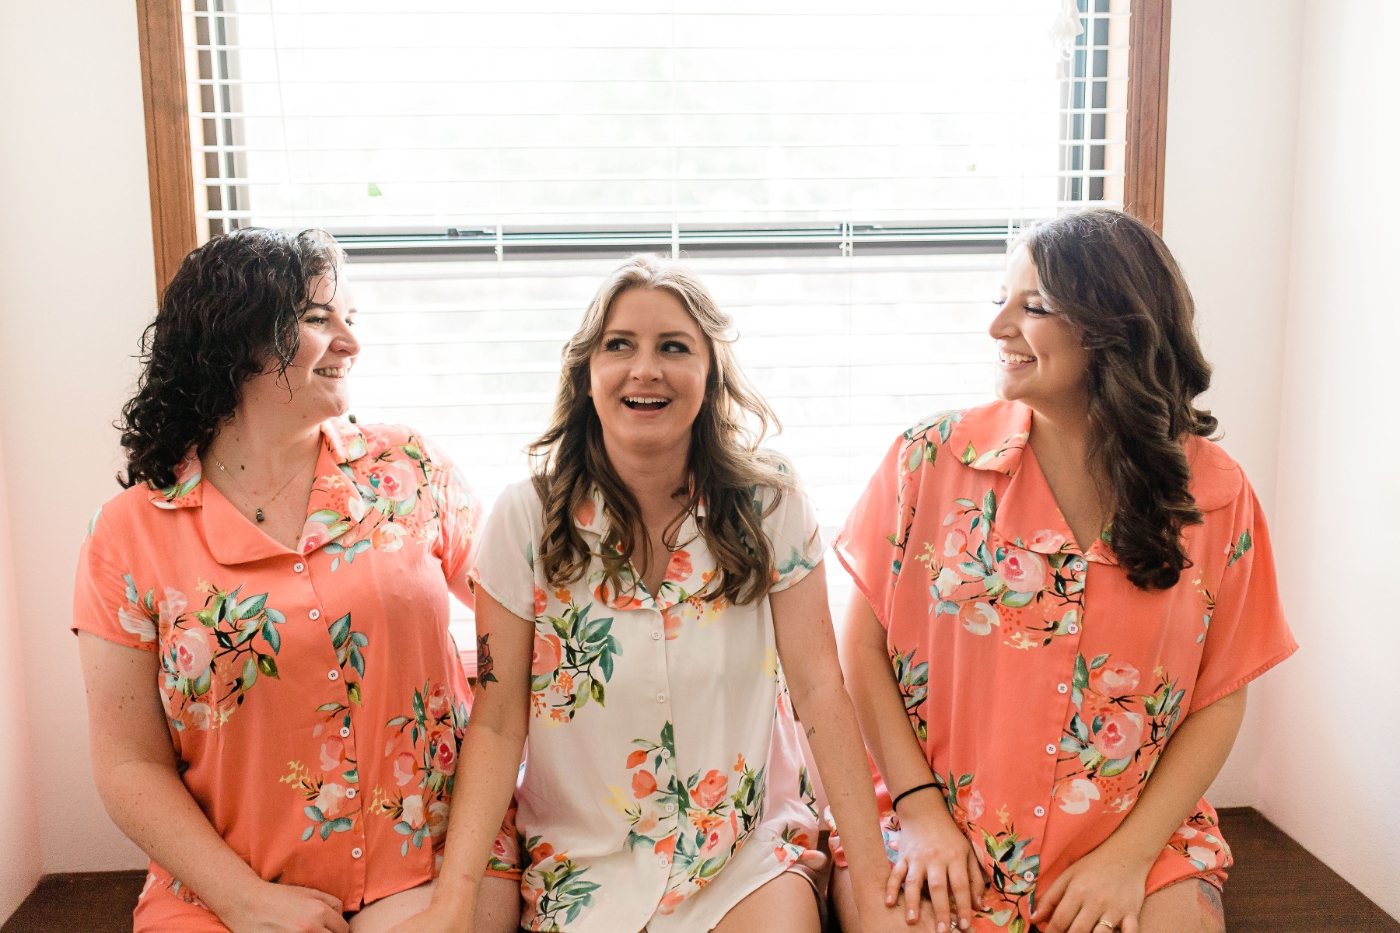 Mae and her bridesmaids in their getting ready pjs